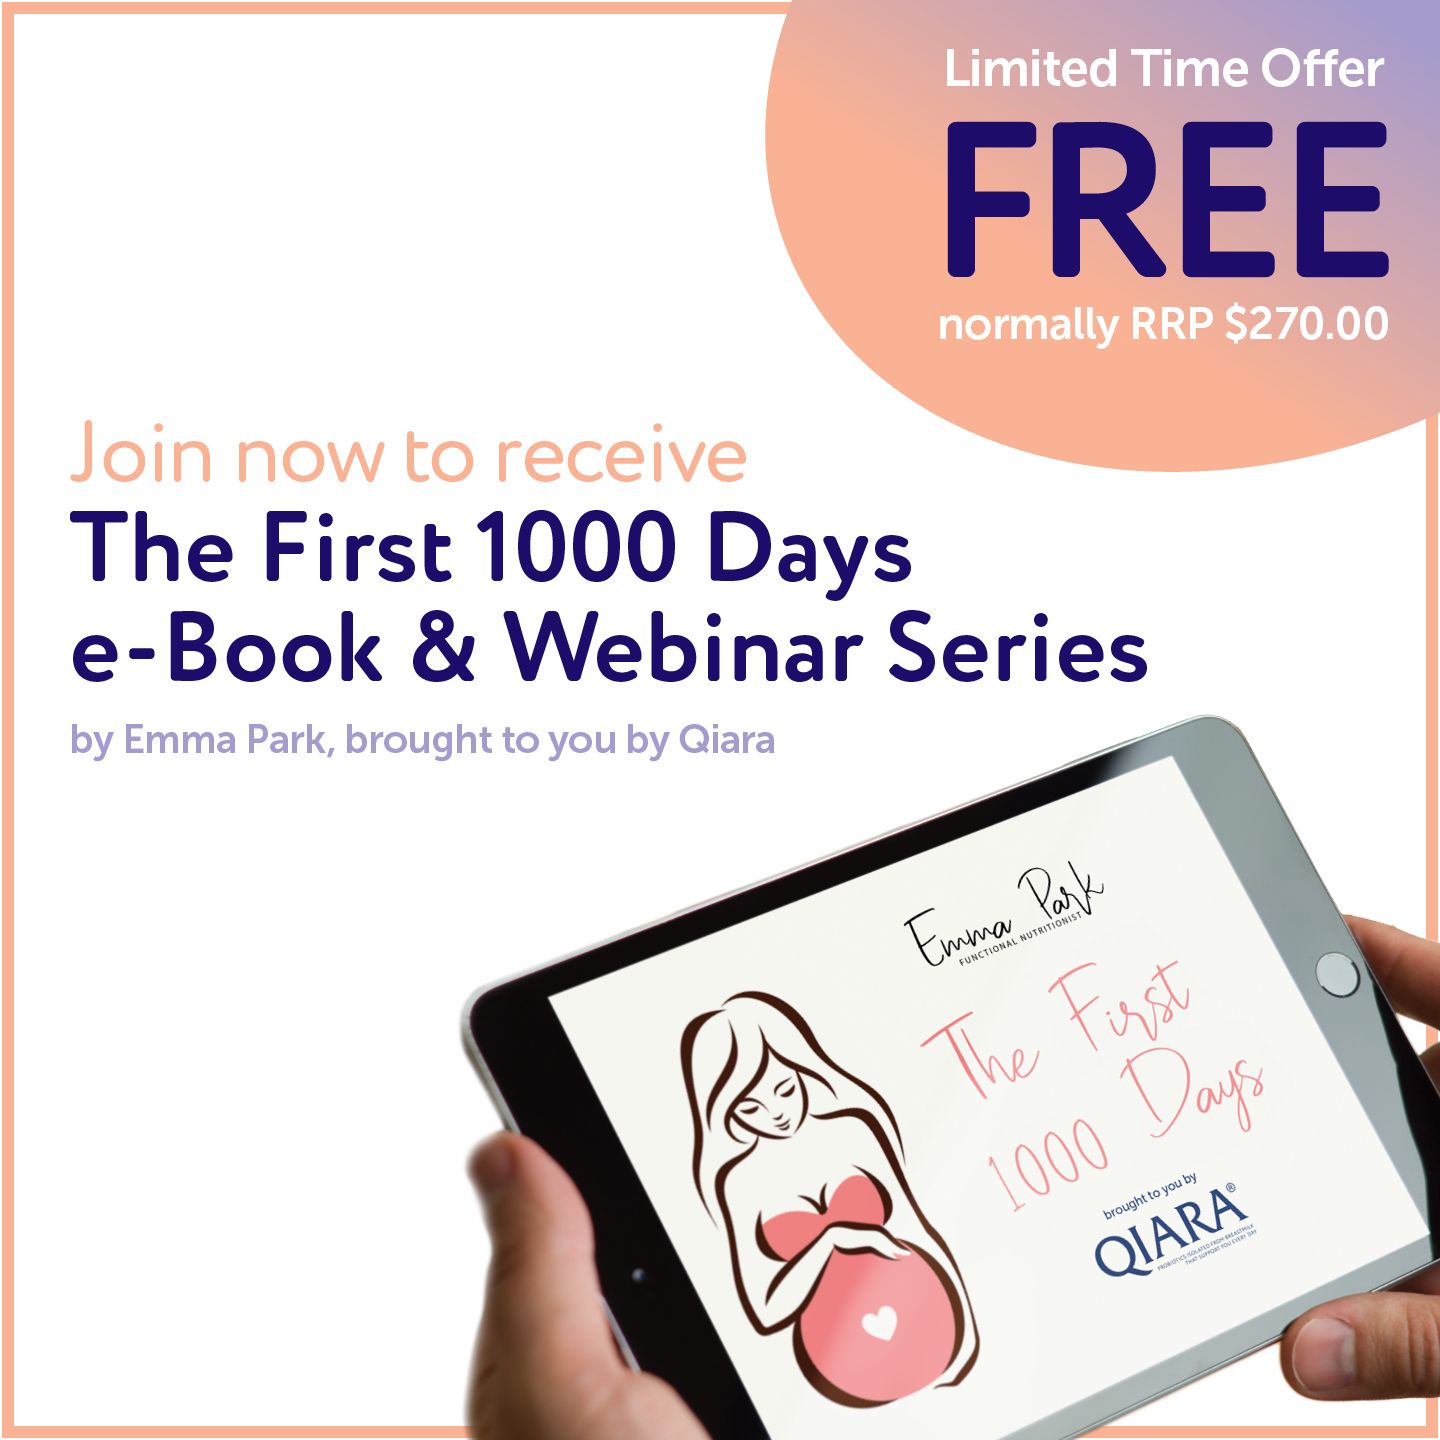 look, emma park's the first 1000 day e-Book and webinar series brought to you by Qiara